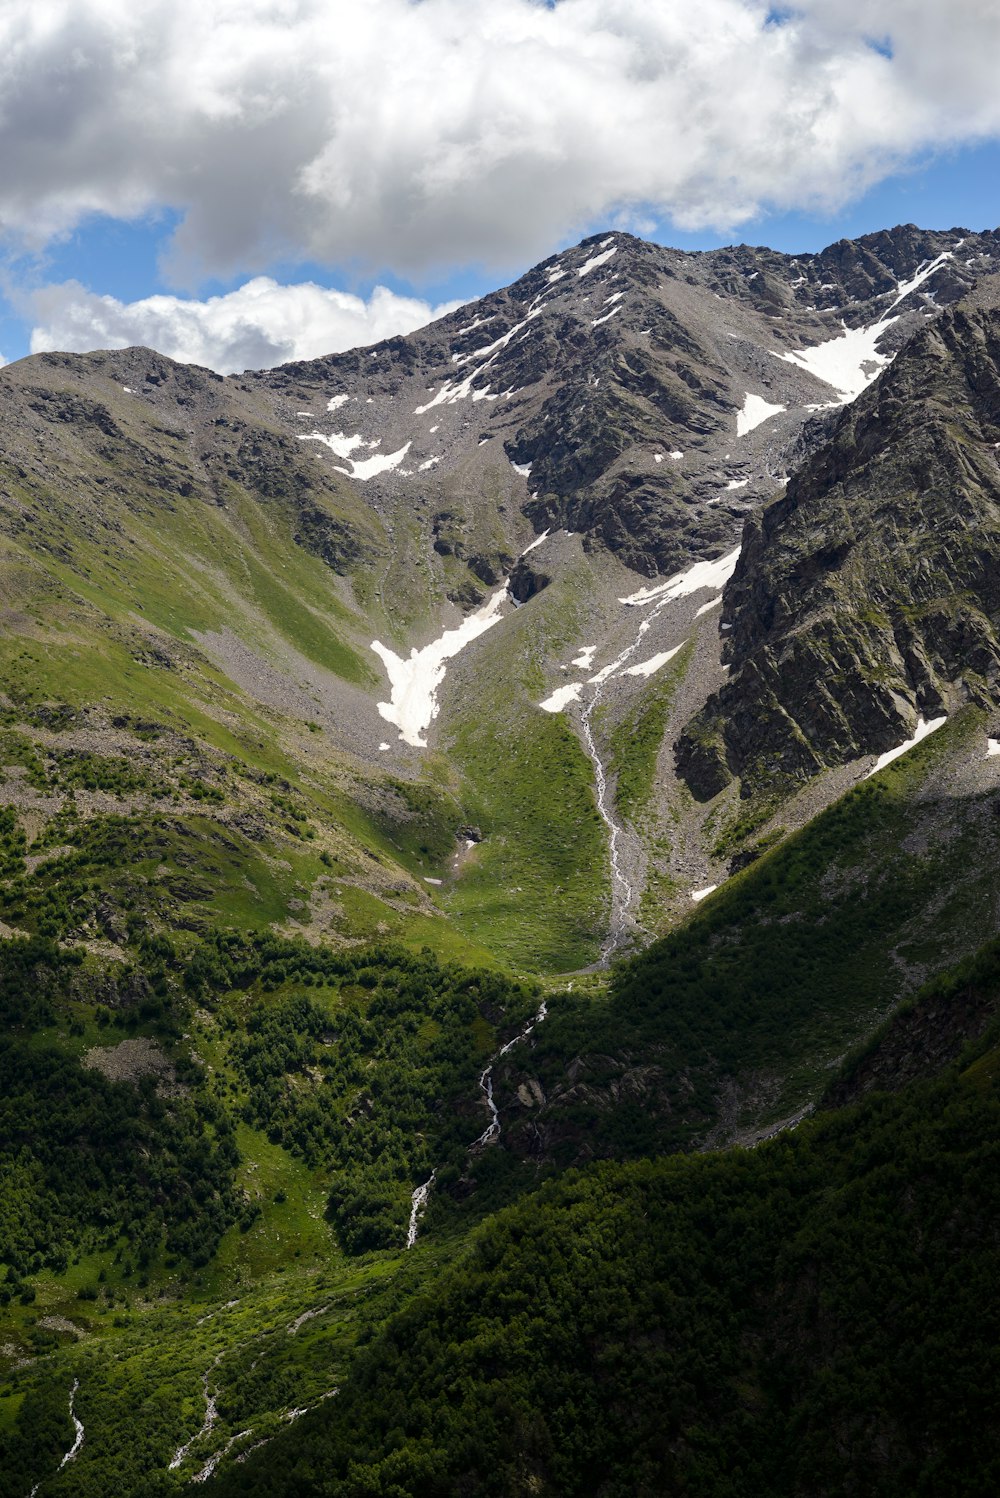 a view of a mountain range with a river running through it